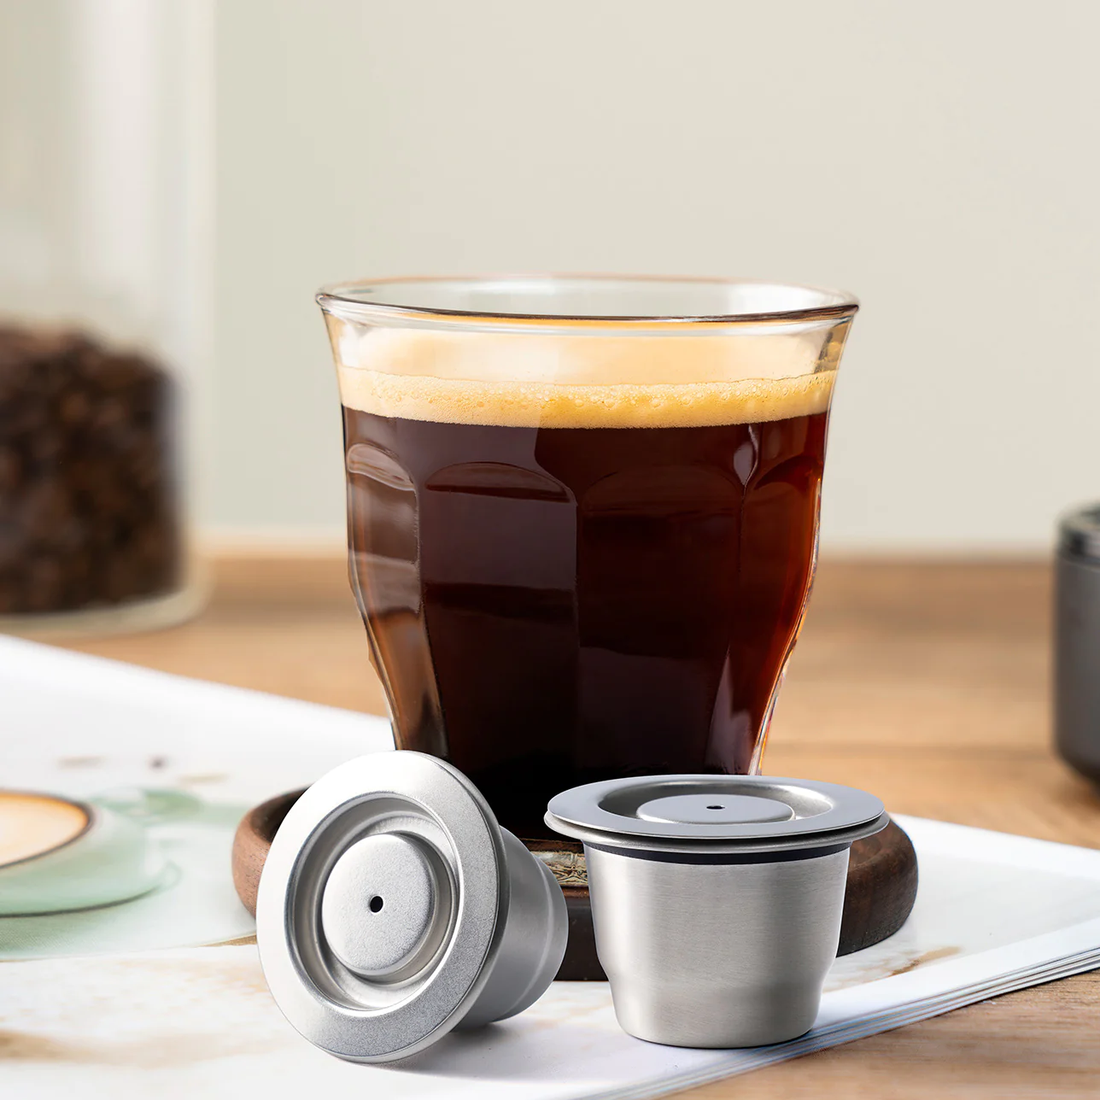 Two stainless steel reusable coffee capsules beside a transparent espresso glass filled with espresso, showcasing a cozy kitchen counter setting